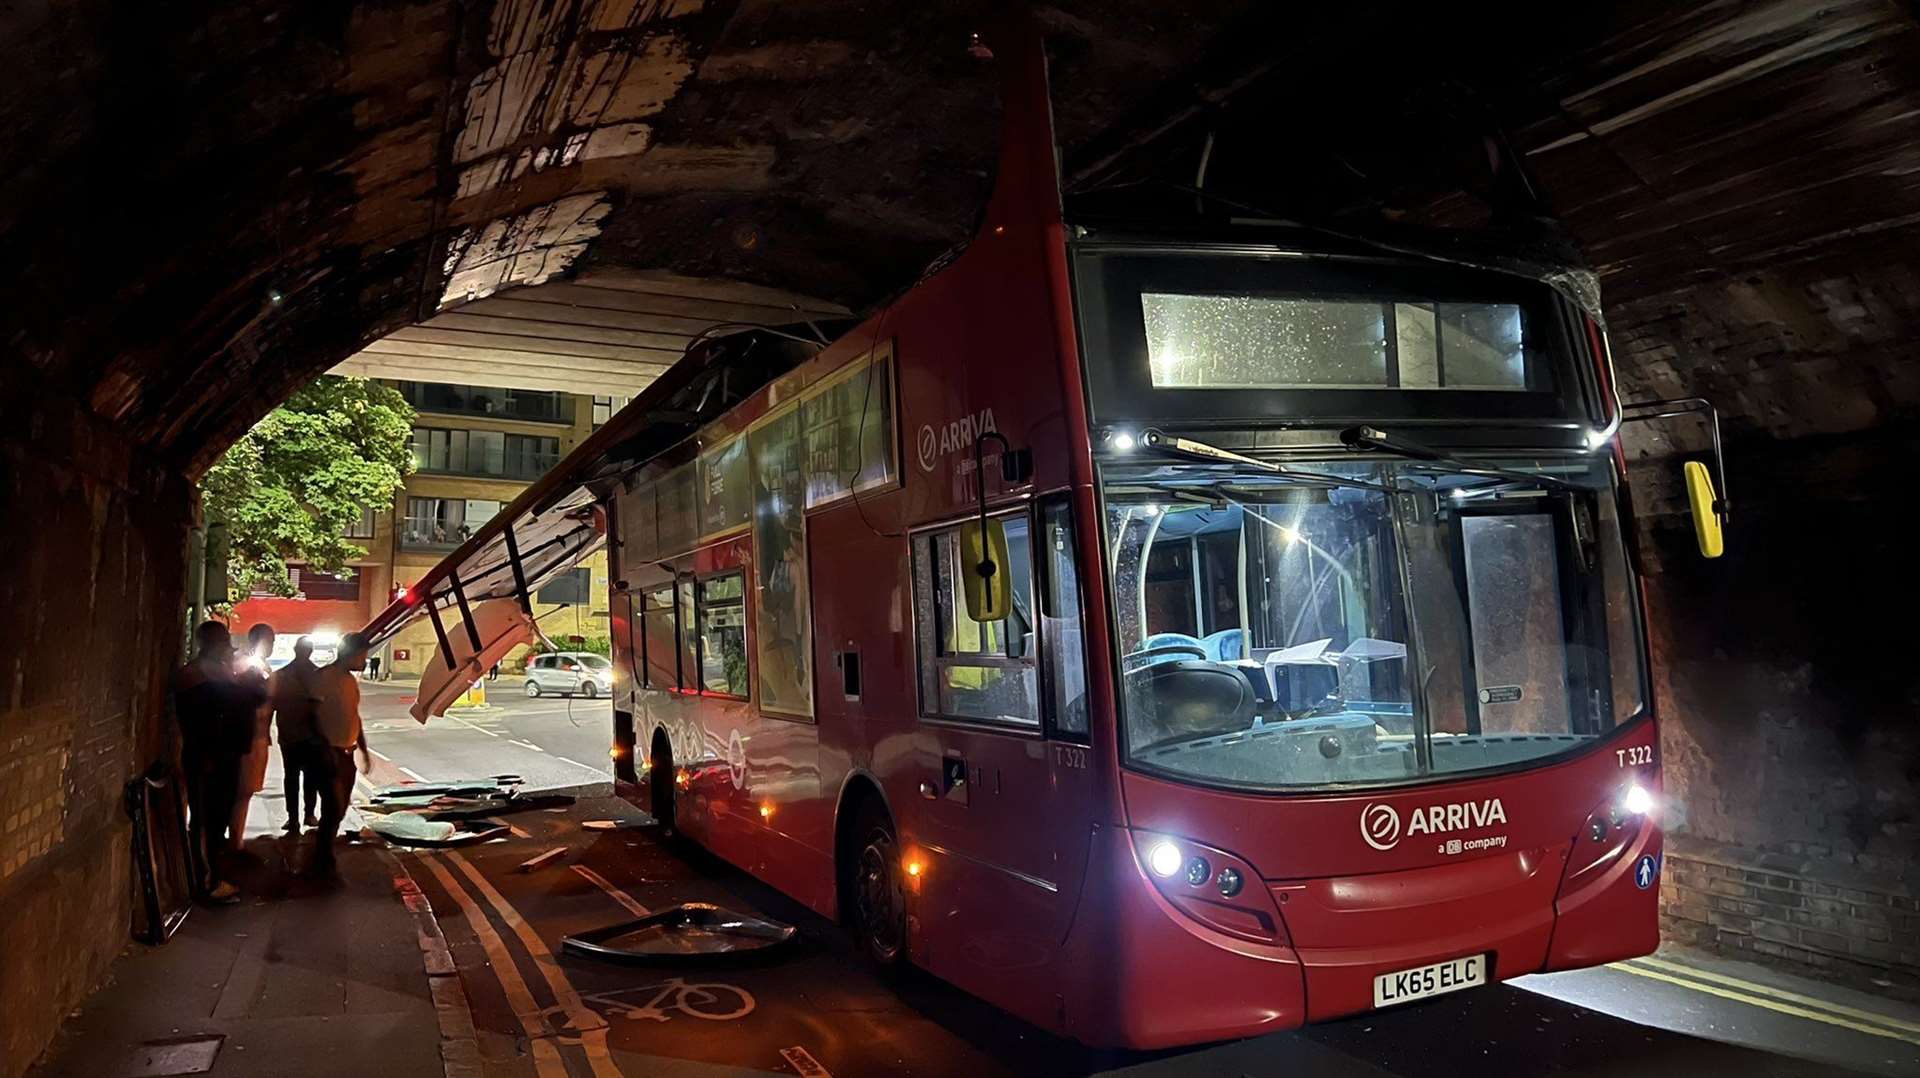 A double decker Arriva bus crashed into a railway bridge in Overy Street, Dartford, at around 9.40pm last night. Picture: @chrispiela/Twitter